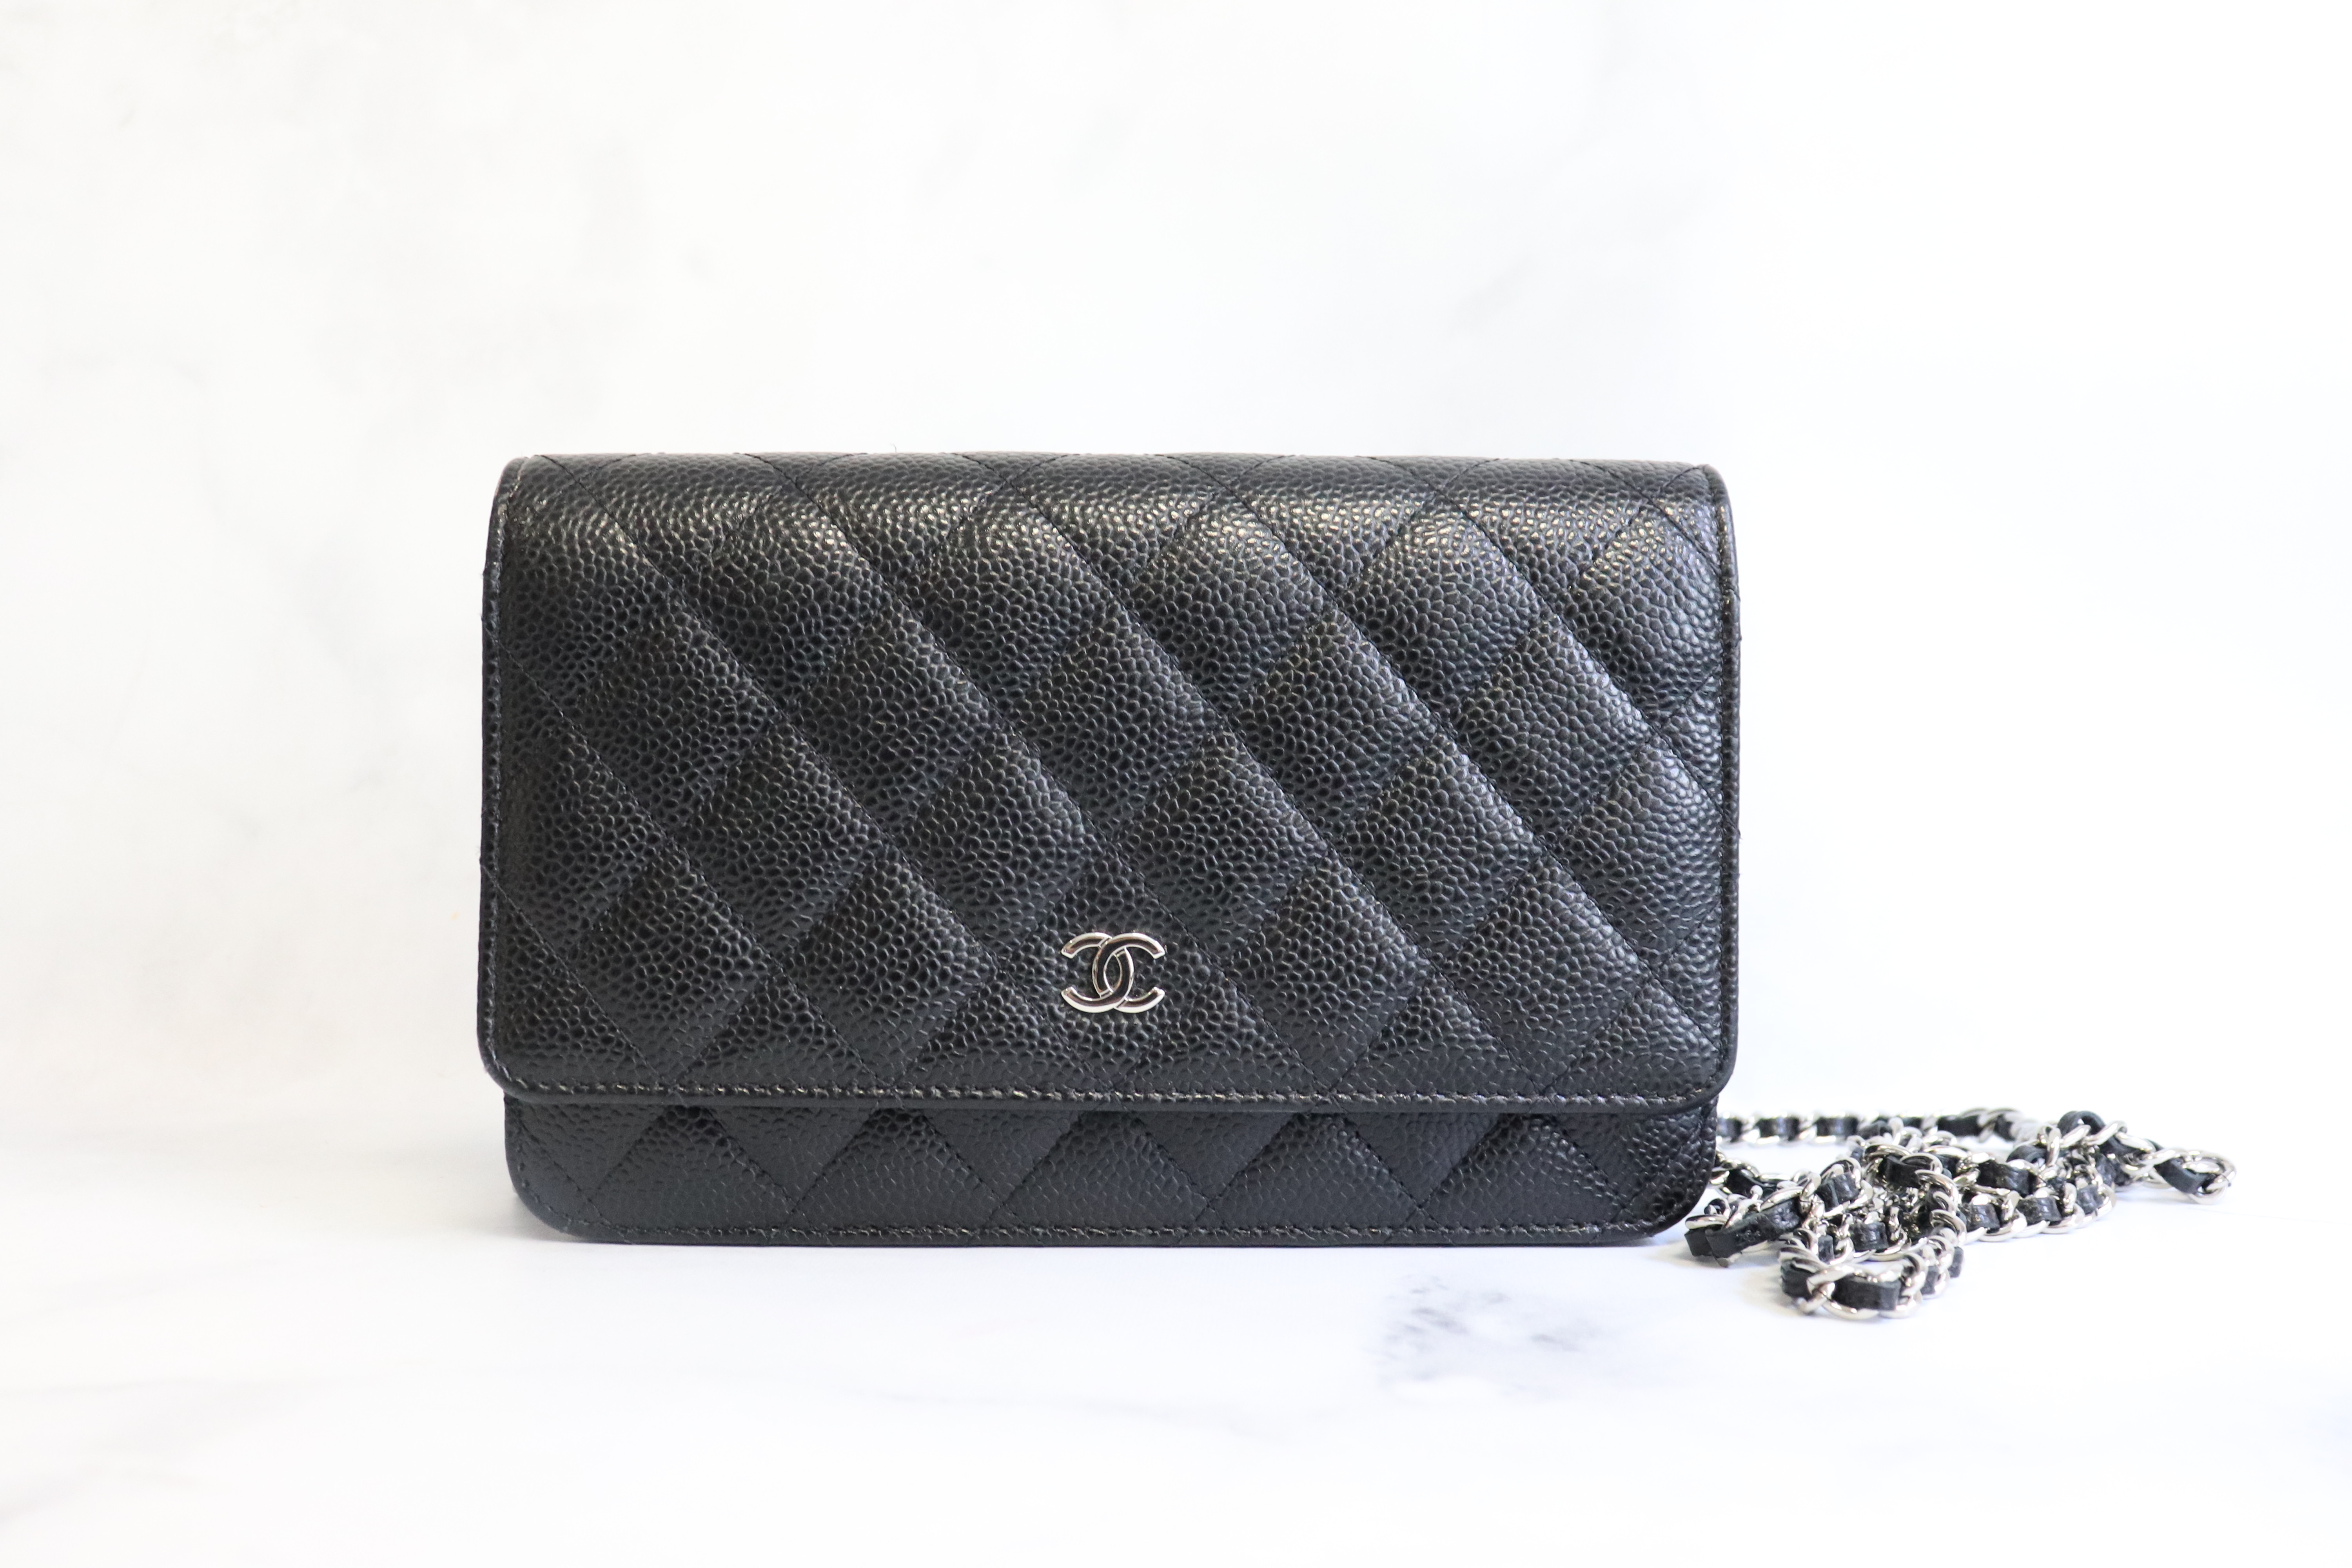 Chanel Wallet on Chain, Black Caviar with Silver Hardware, Preowned with Box  - Julia Rose Boston